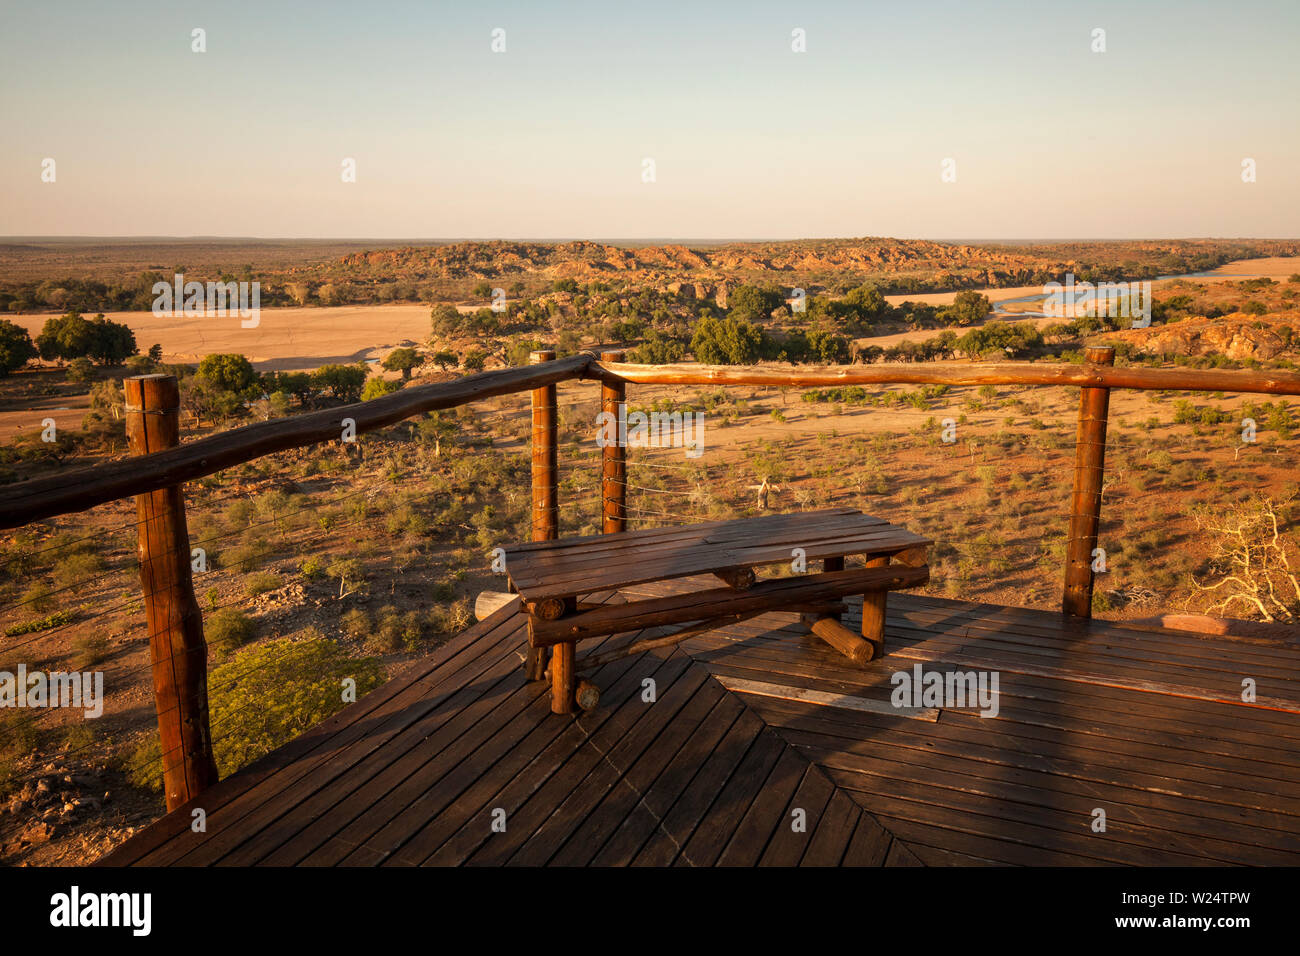 A view over Mapungubwe National Park in South Africa. The Limpopo River can be seen in the distance. Stock Photo